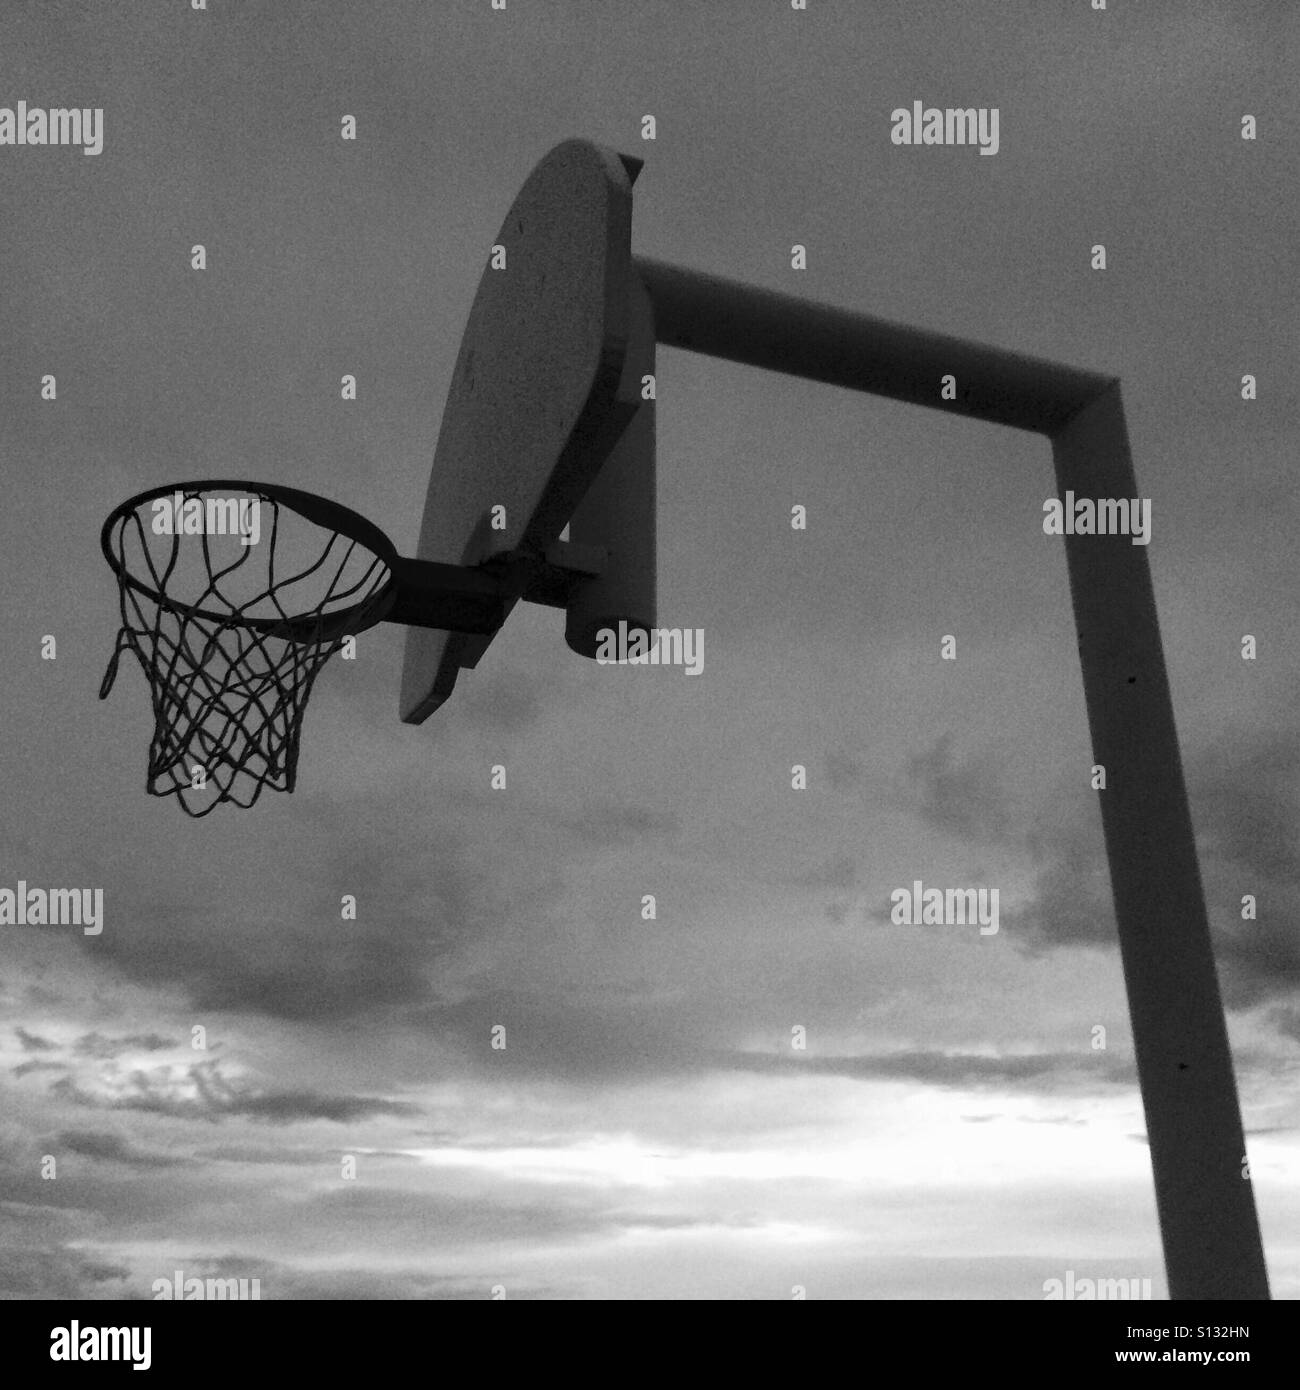 Basketball hoop and net before a sunset. Stock Photo